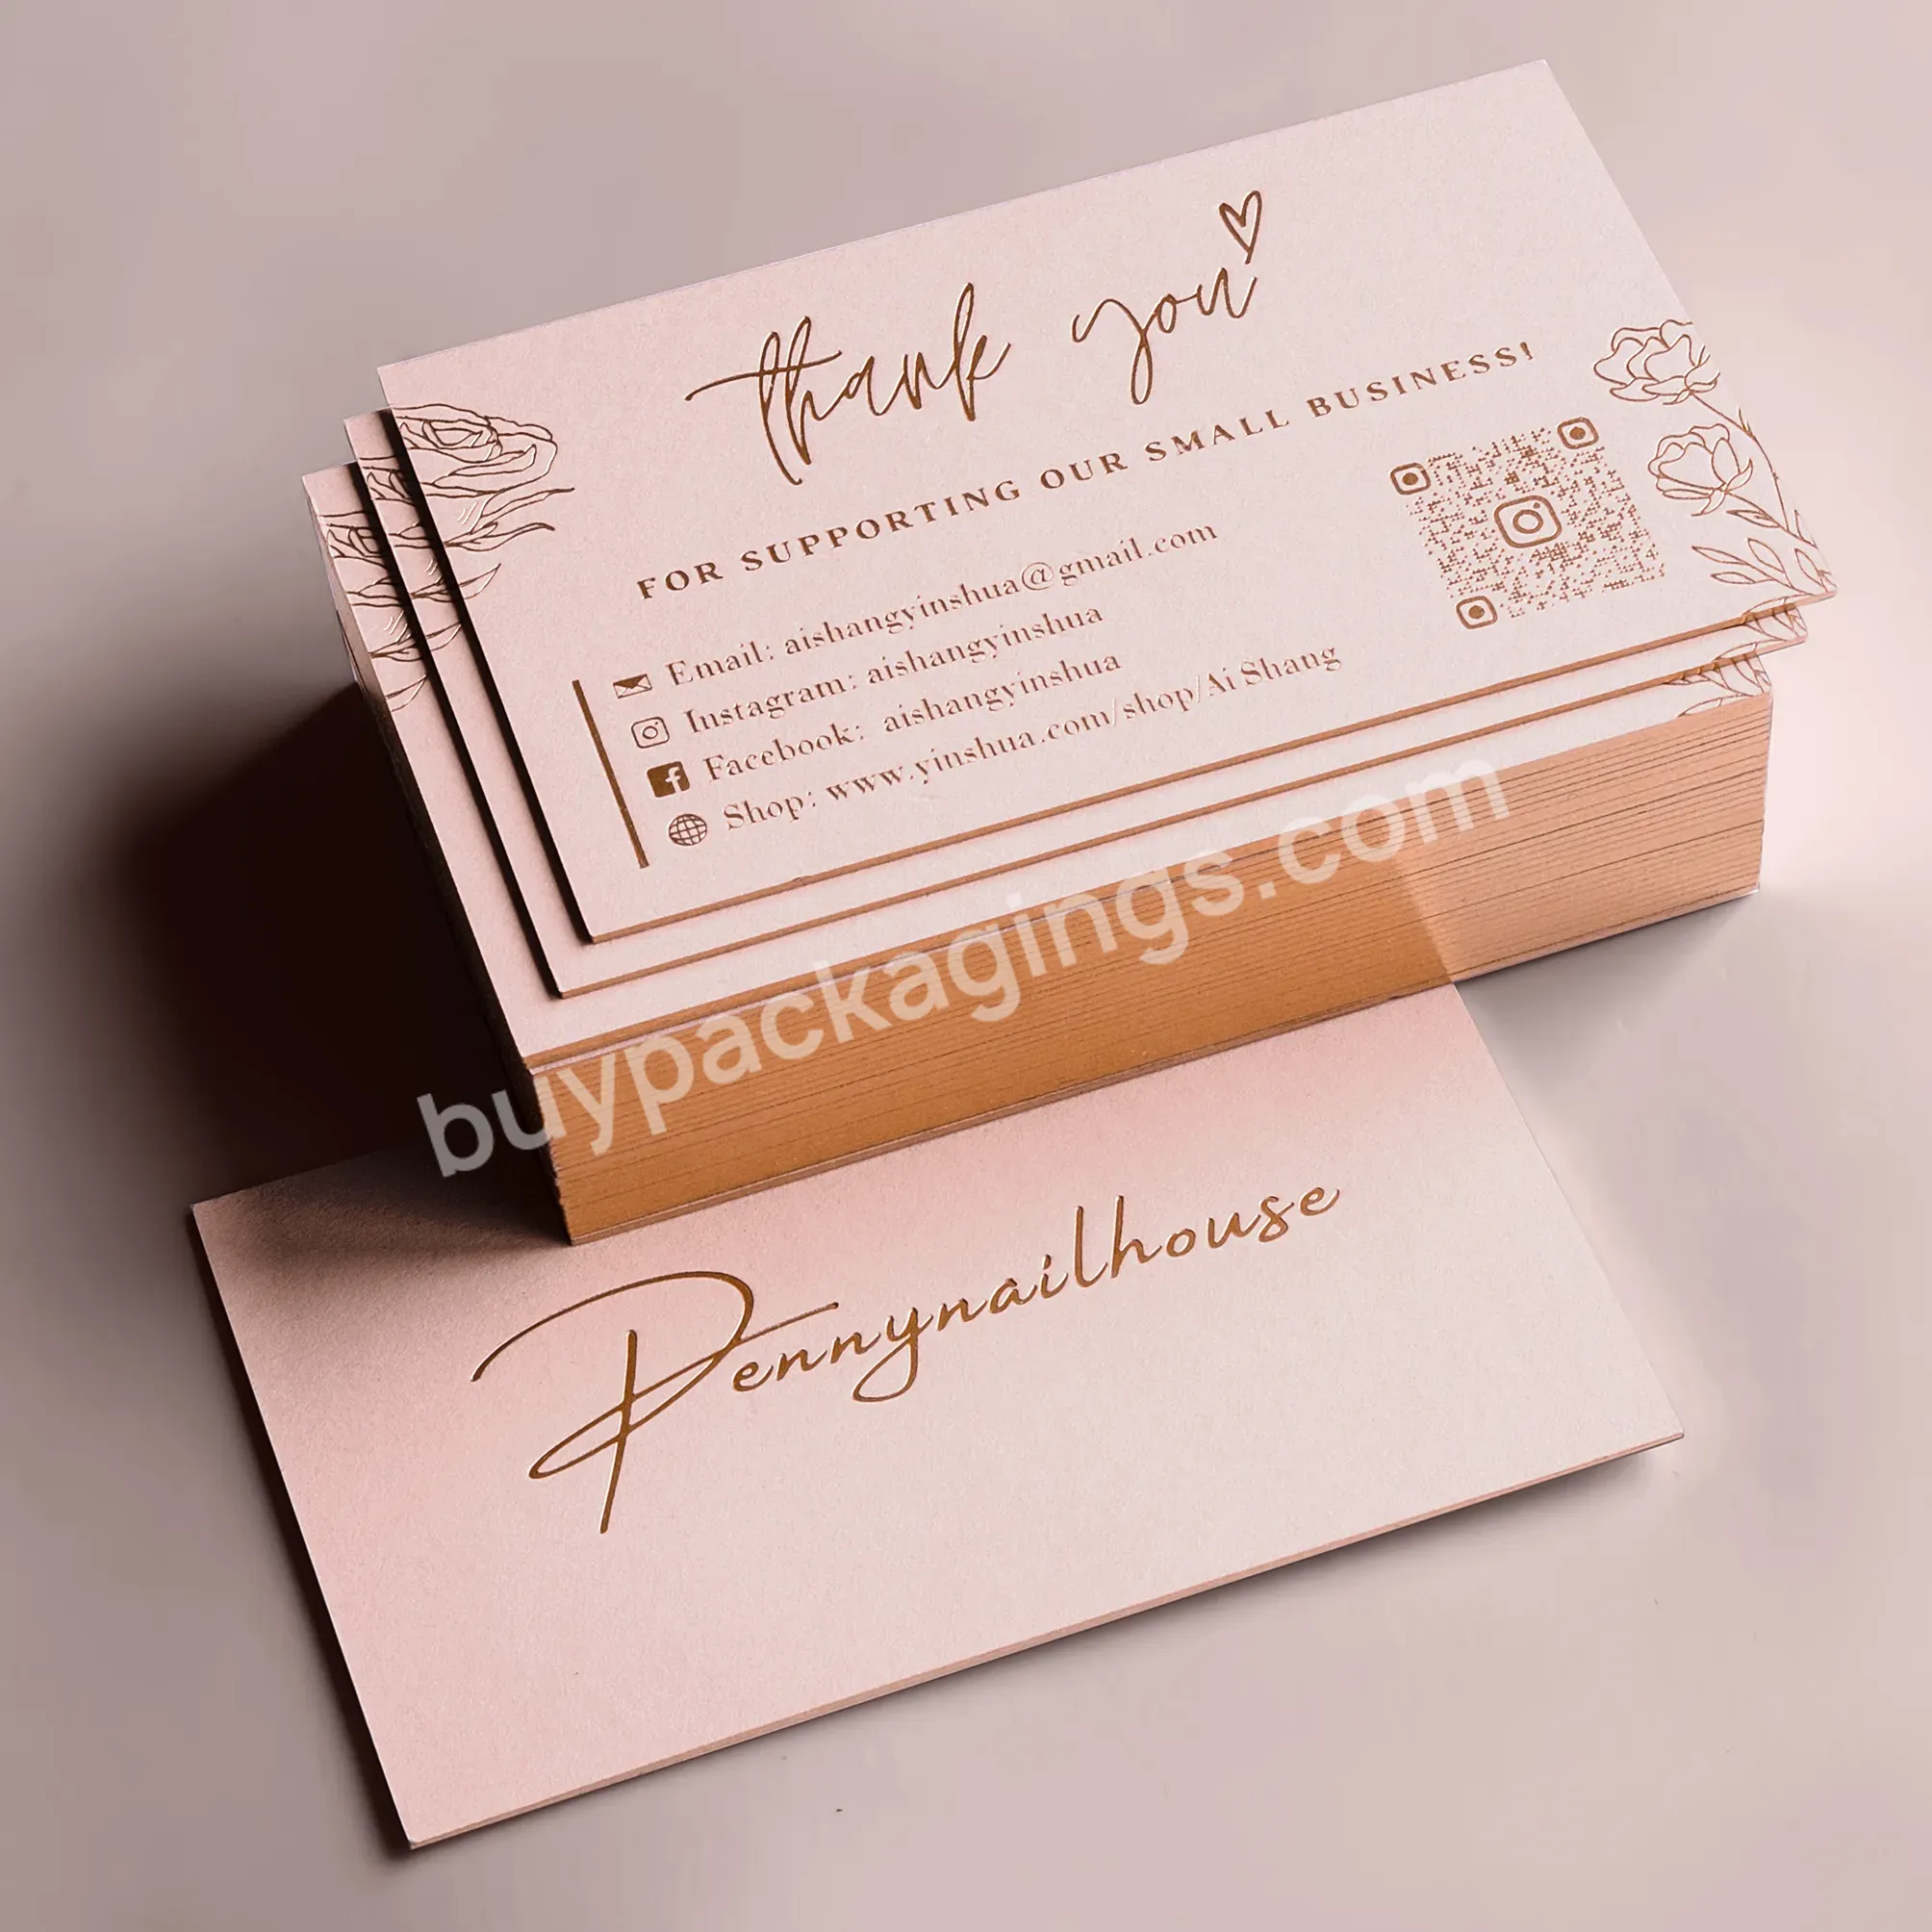 Luxury Hot Stamping Gold Metal Foil Black Cardboard Business Name Cards With Logo - Buy High Quality Cmyk Offset Printing Cotton Cardboard Business Cards,Fashion New Design Fashion New Design,Edge Colored Custom Letterpressed Business Card.